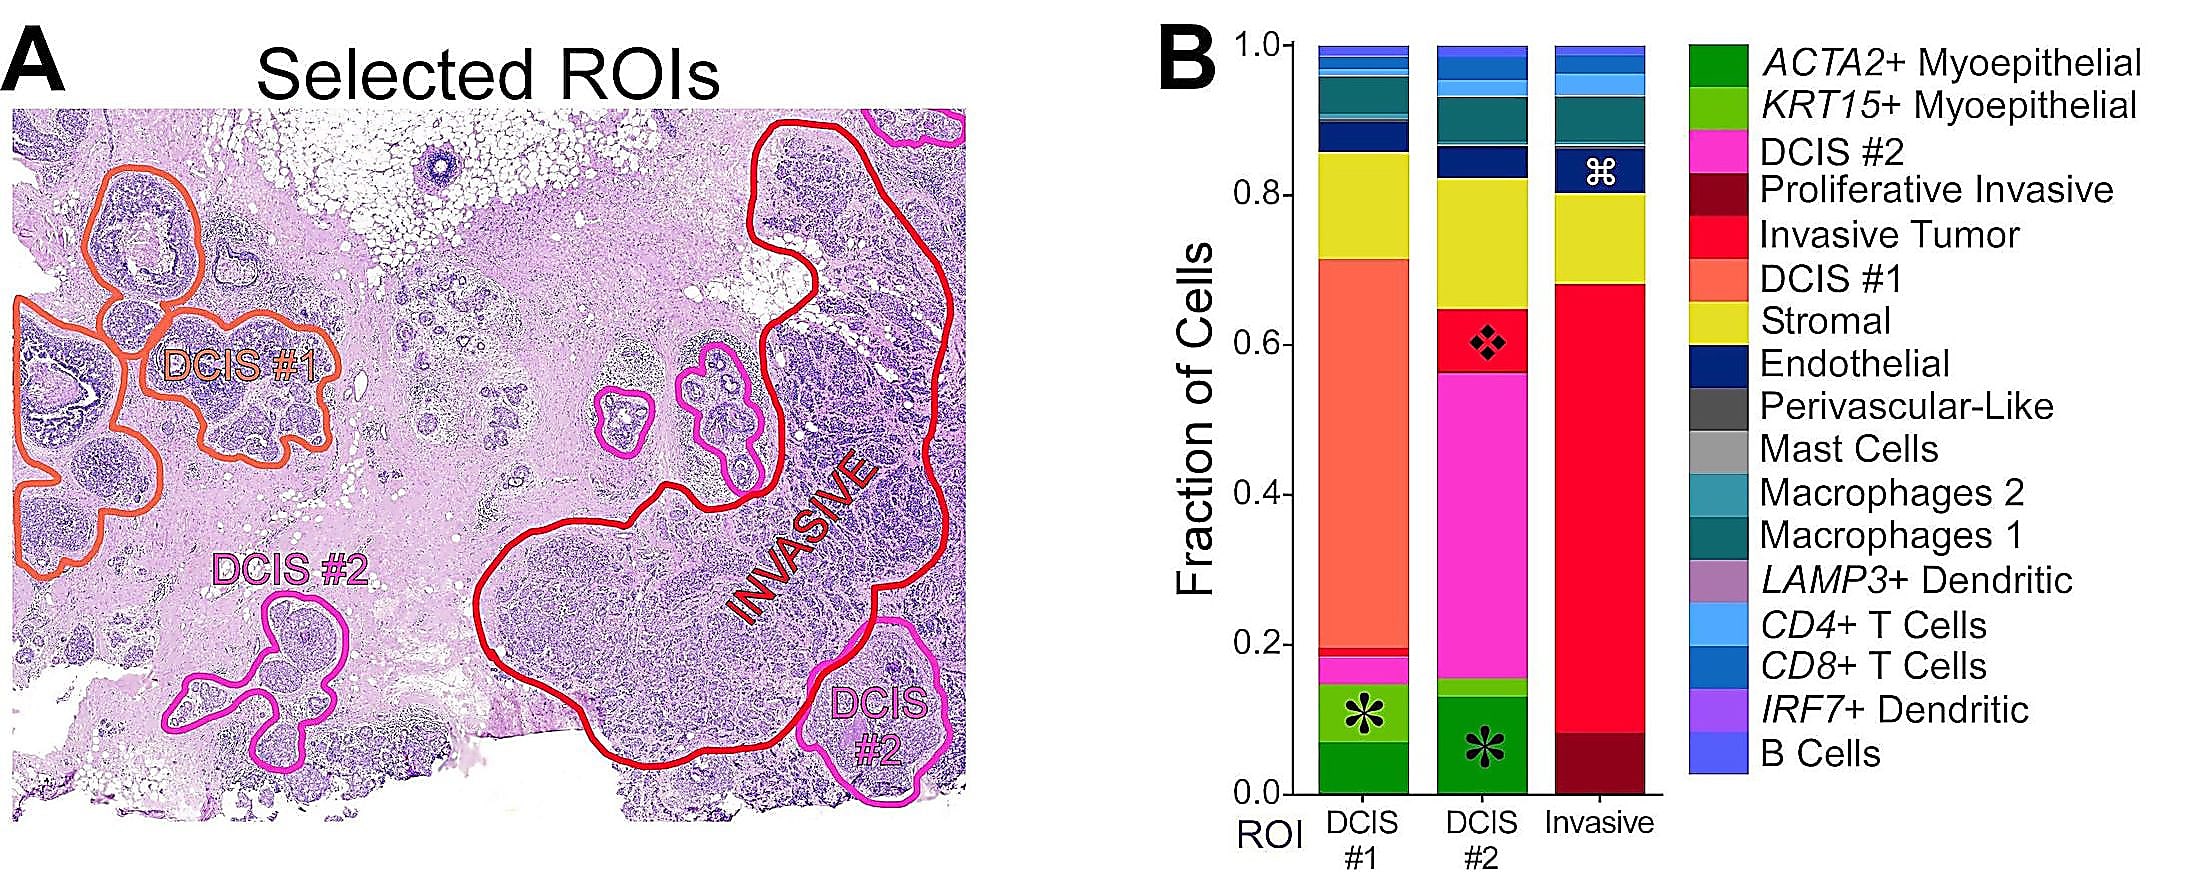 Figure 3. Comprehensive analysis of this biopsy sample, including single cell sequencing of serial sections adjacent to the one analyzed by Xenium, demonstrated a complex tumor landscape with several distinct regions. Panel A shows the location of select regions of interest with the H&E image, and Panel B shows the cellular composition differences between these regions. Image credit: Janesick A, et al. bioRxiv (2022).